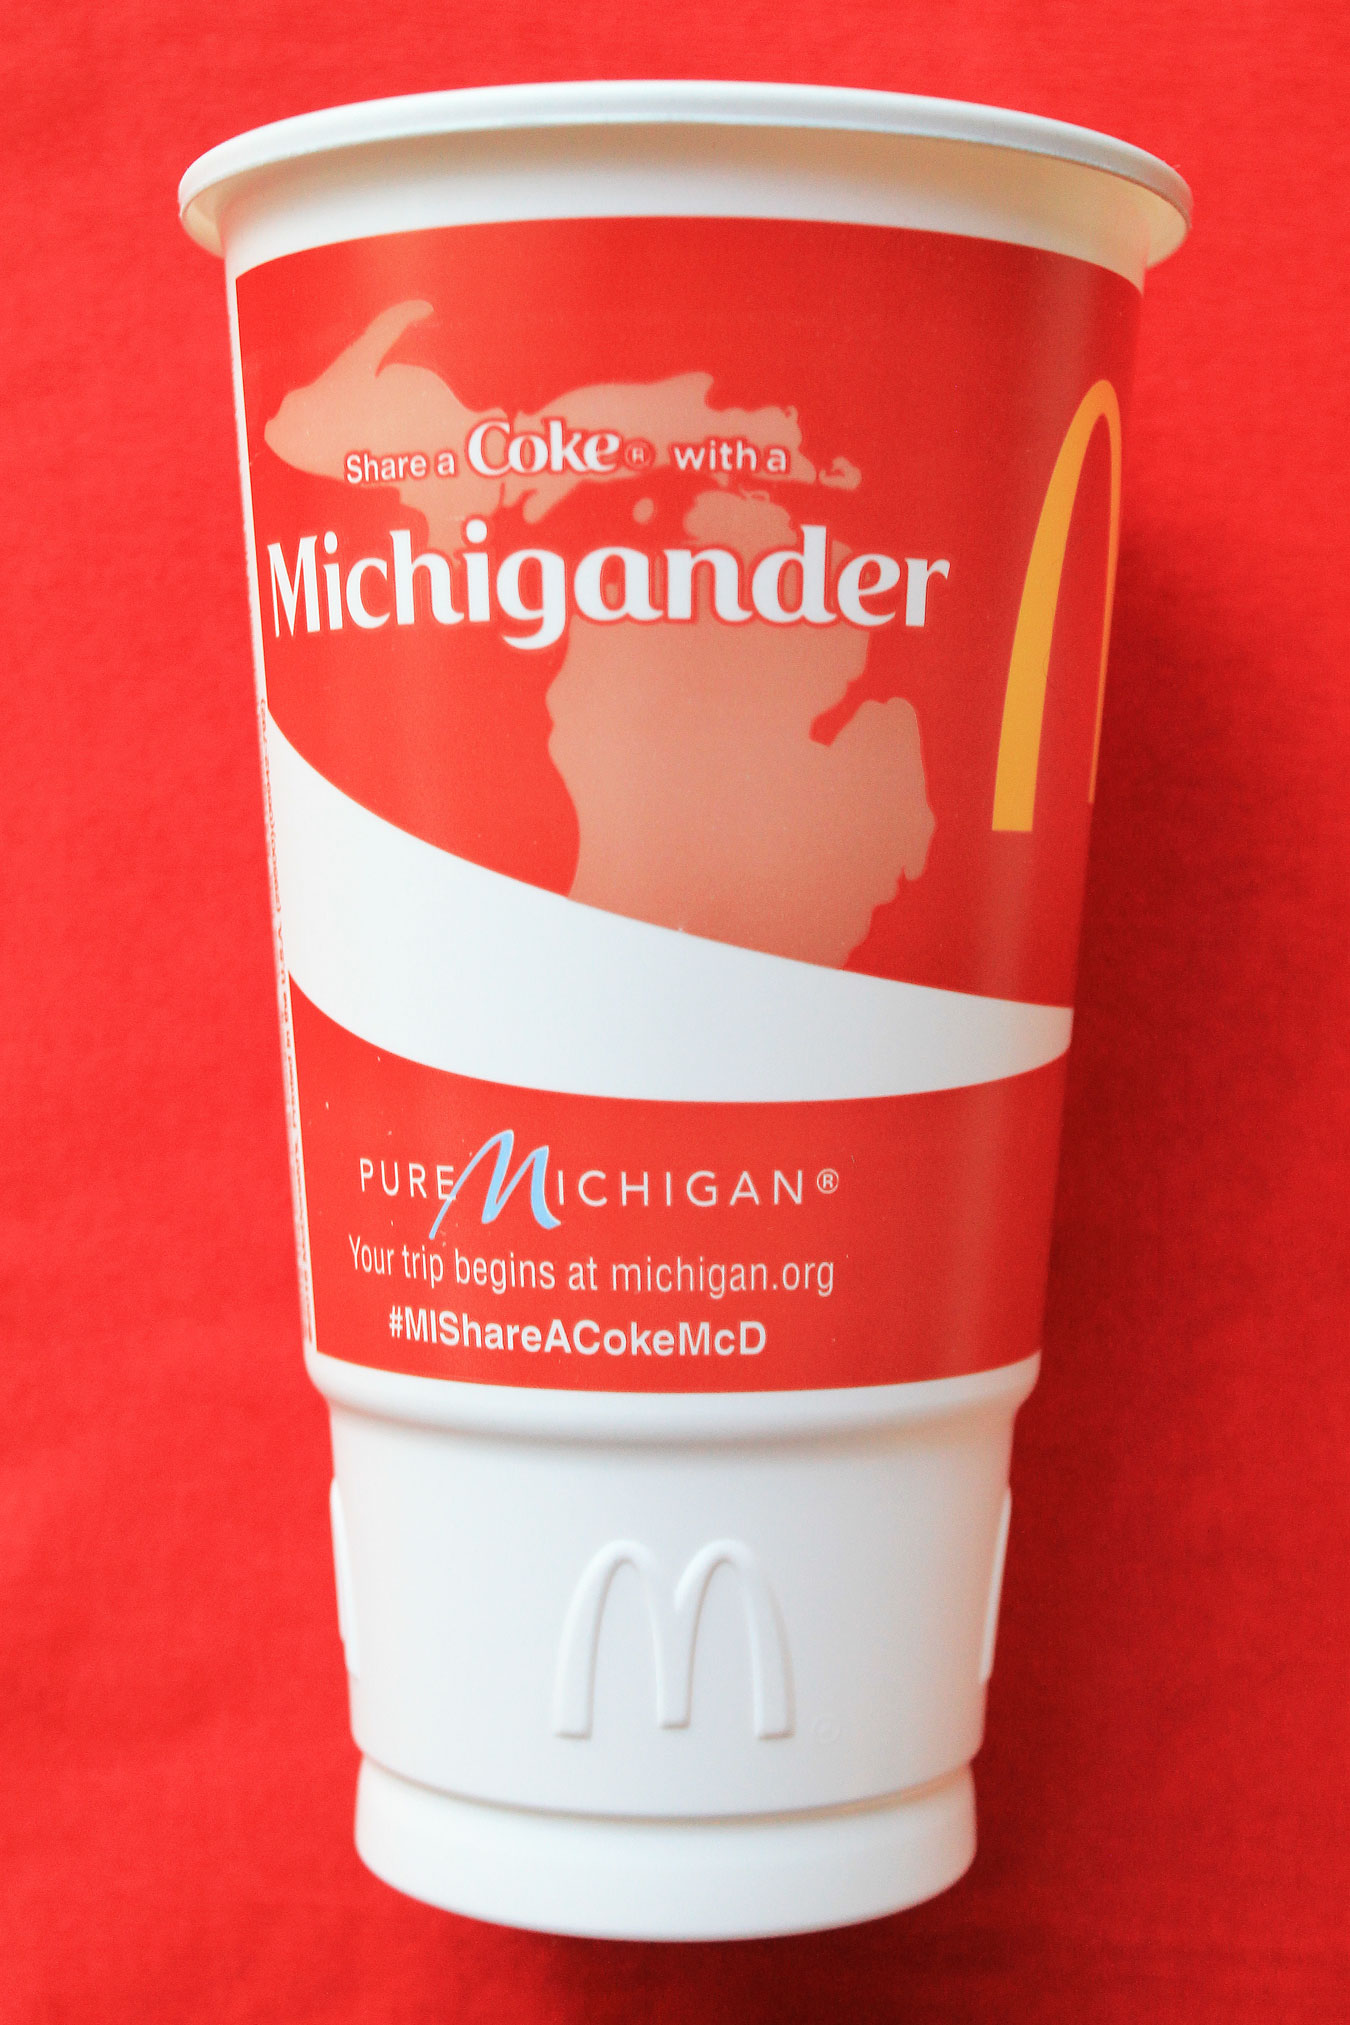 End of Summer Road Trip: Share A Coke Michigan Style At McDonald's (MIShareACokeMcD) - via Wading in Big Shoes